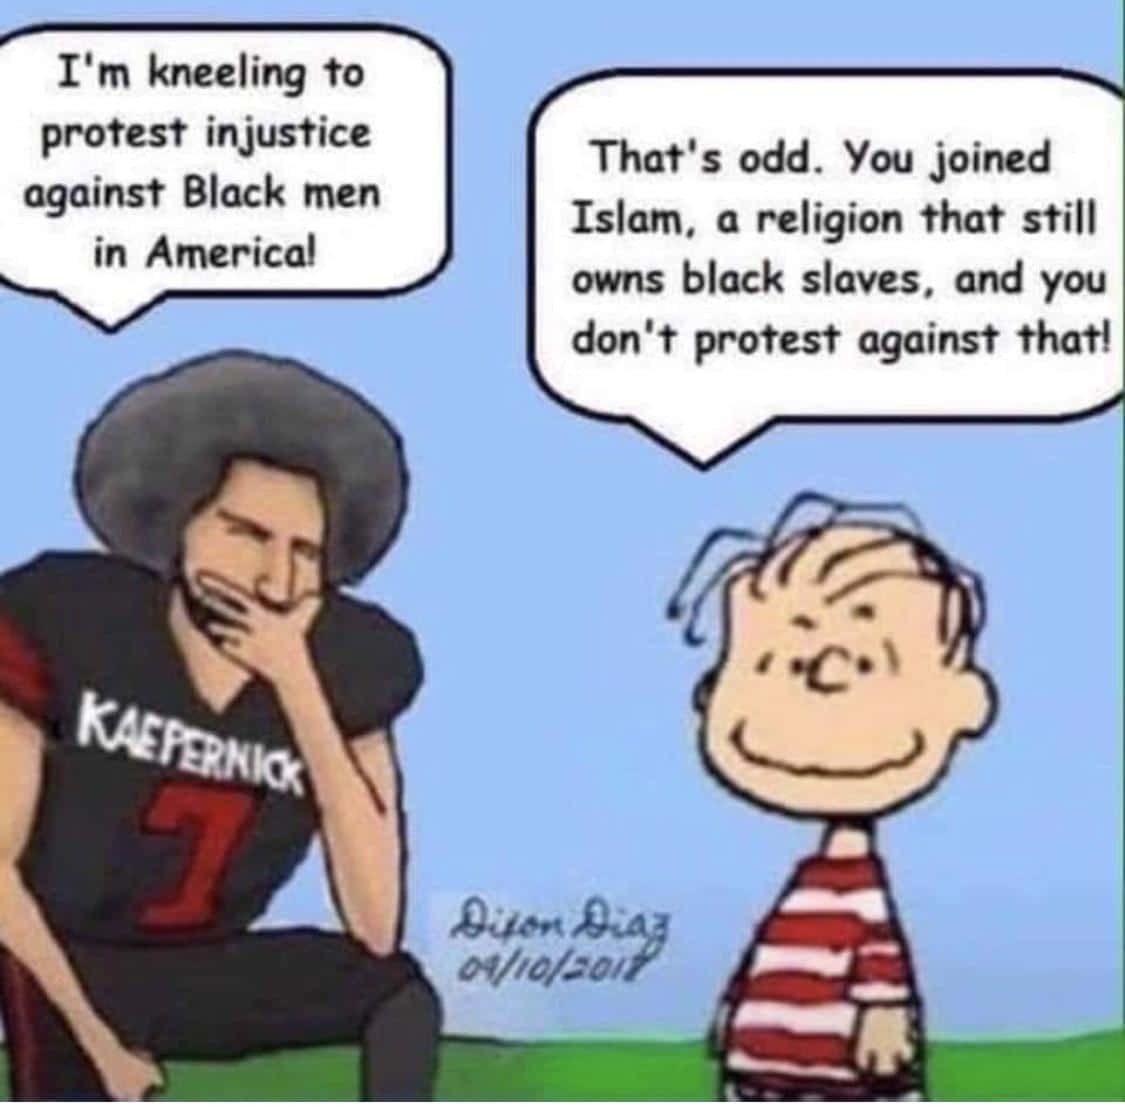 Cringe, Muslim, Islam, Islamic, God, Linus cringe memes Cringe, Muslim, Islam, Islamic, God, Linus text: I'm kneeling to protest injustice against Black men in America! That's odd. You joined Islam. a religion that still owns black slaves. and you don't protest against that! 04/44/50/ 